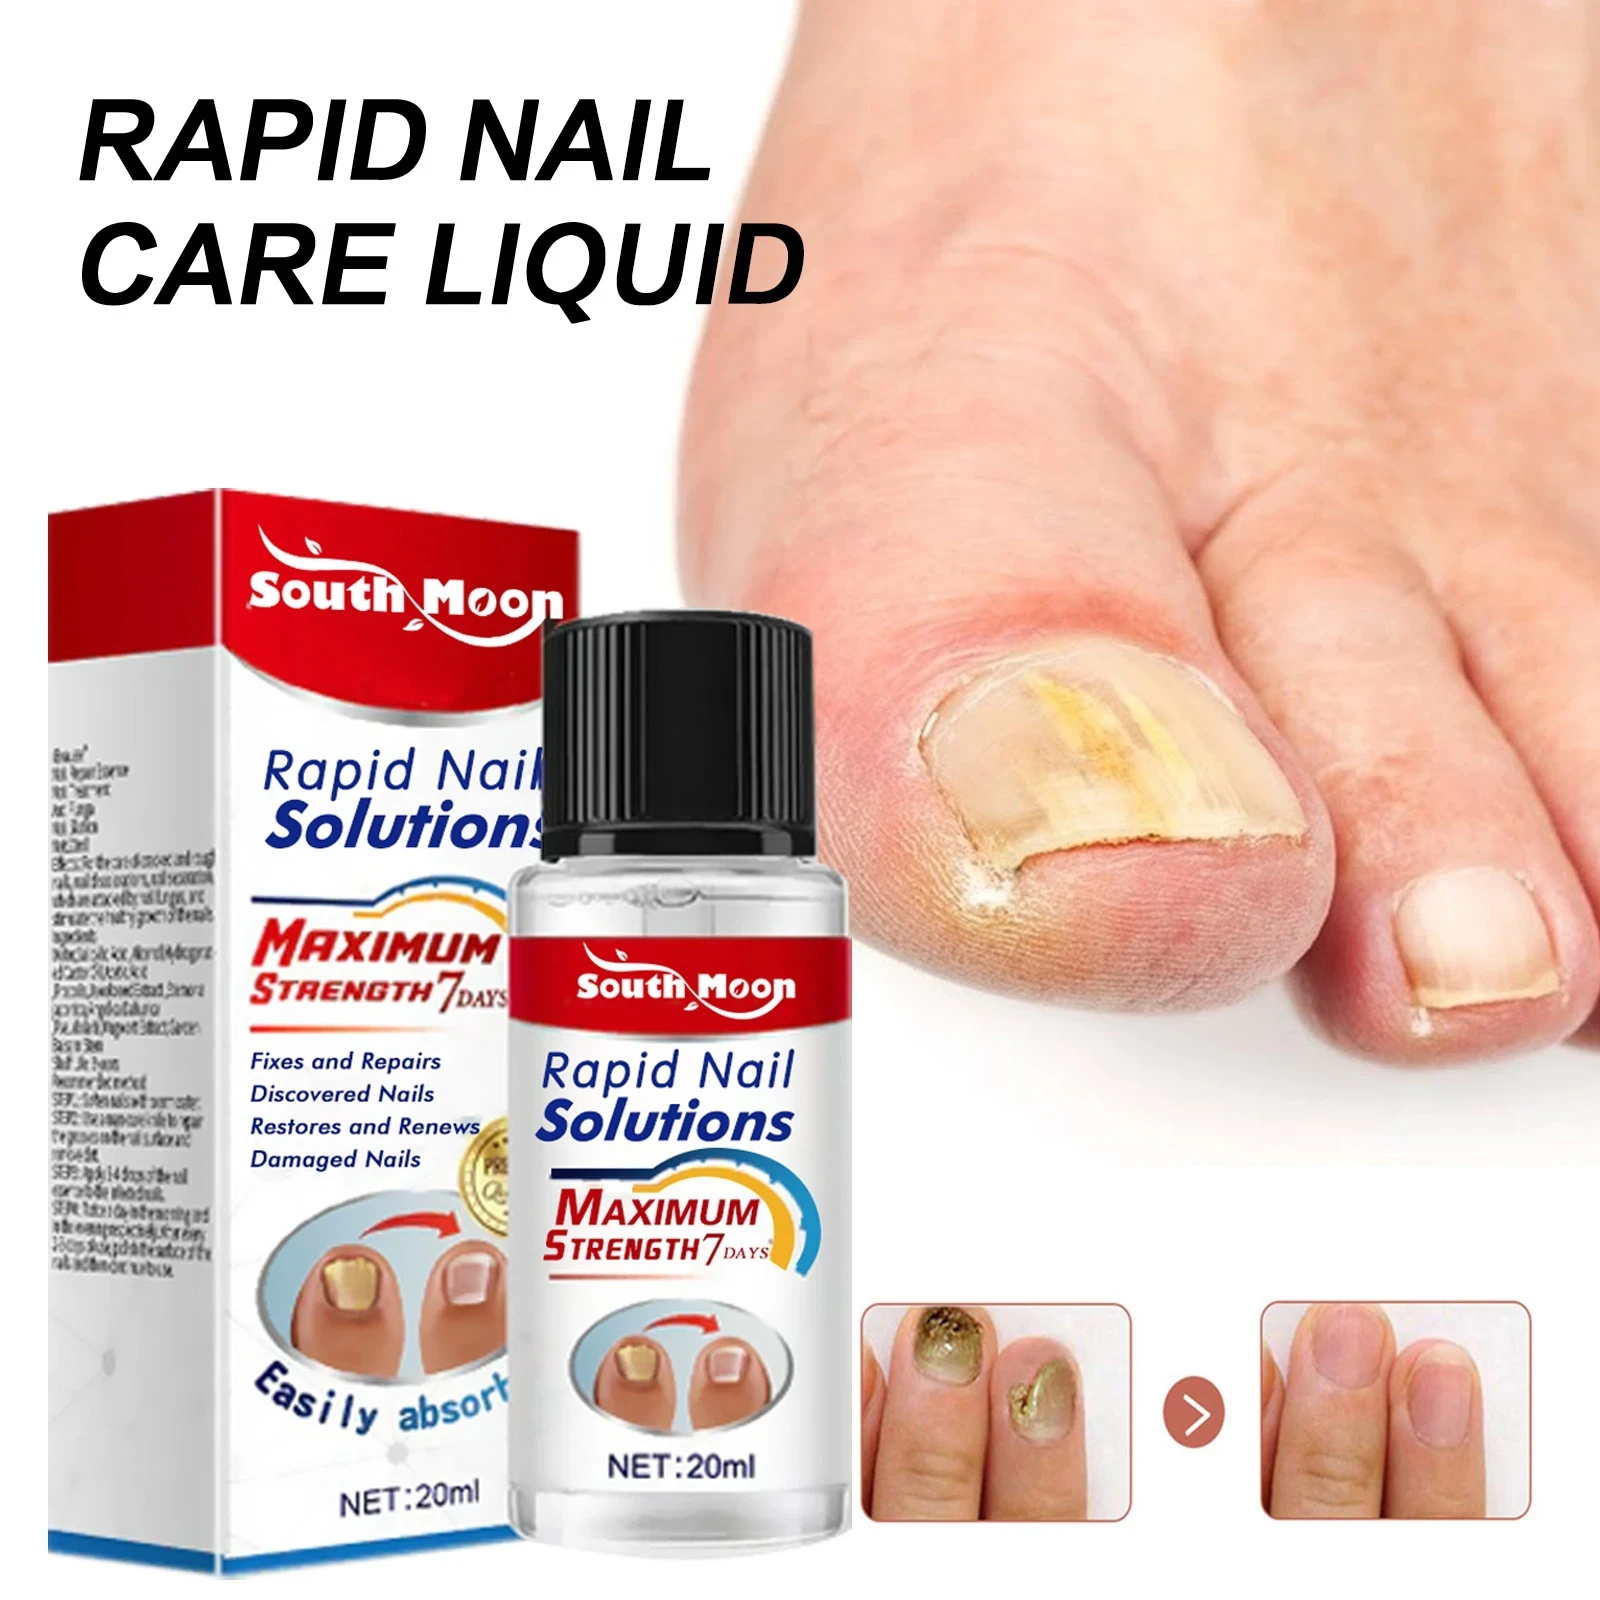 Nail Fungal Treatment Serum Anti Infection Onychomycosis Paronychia Rapid Repair Gel Toe Nail Fungal Fast Removal Hand Foot Care 5x instantly eye bag removal eye cream long lasting wrinkles lines puffiness serum dark remover care fine effect eyes circle